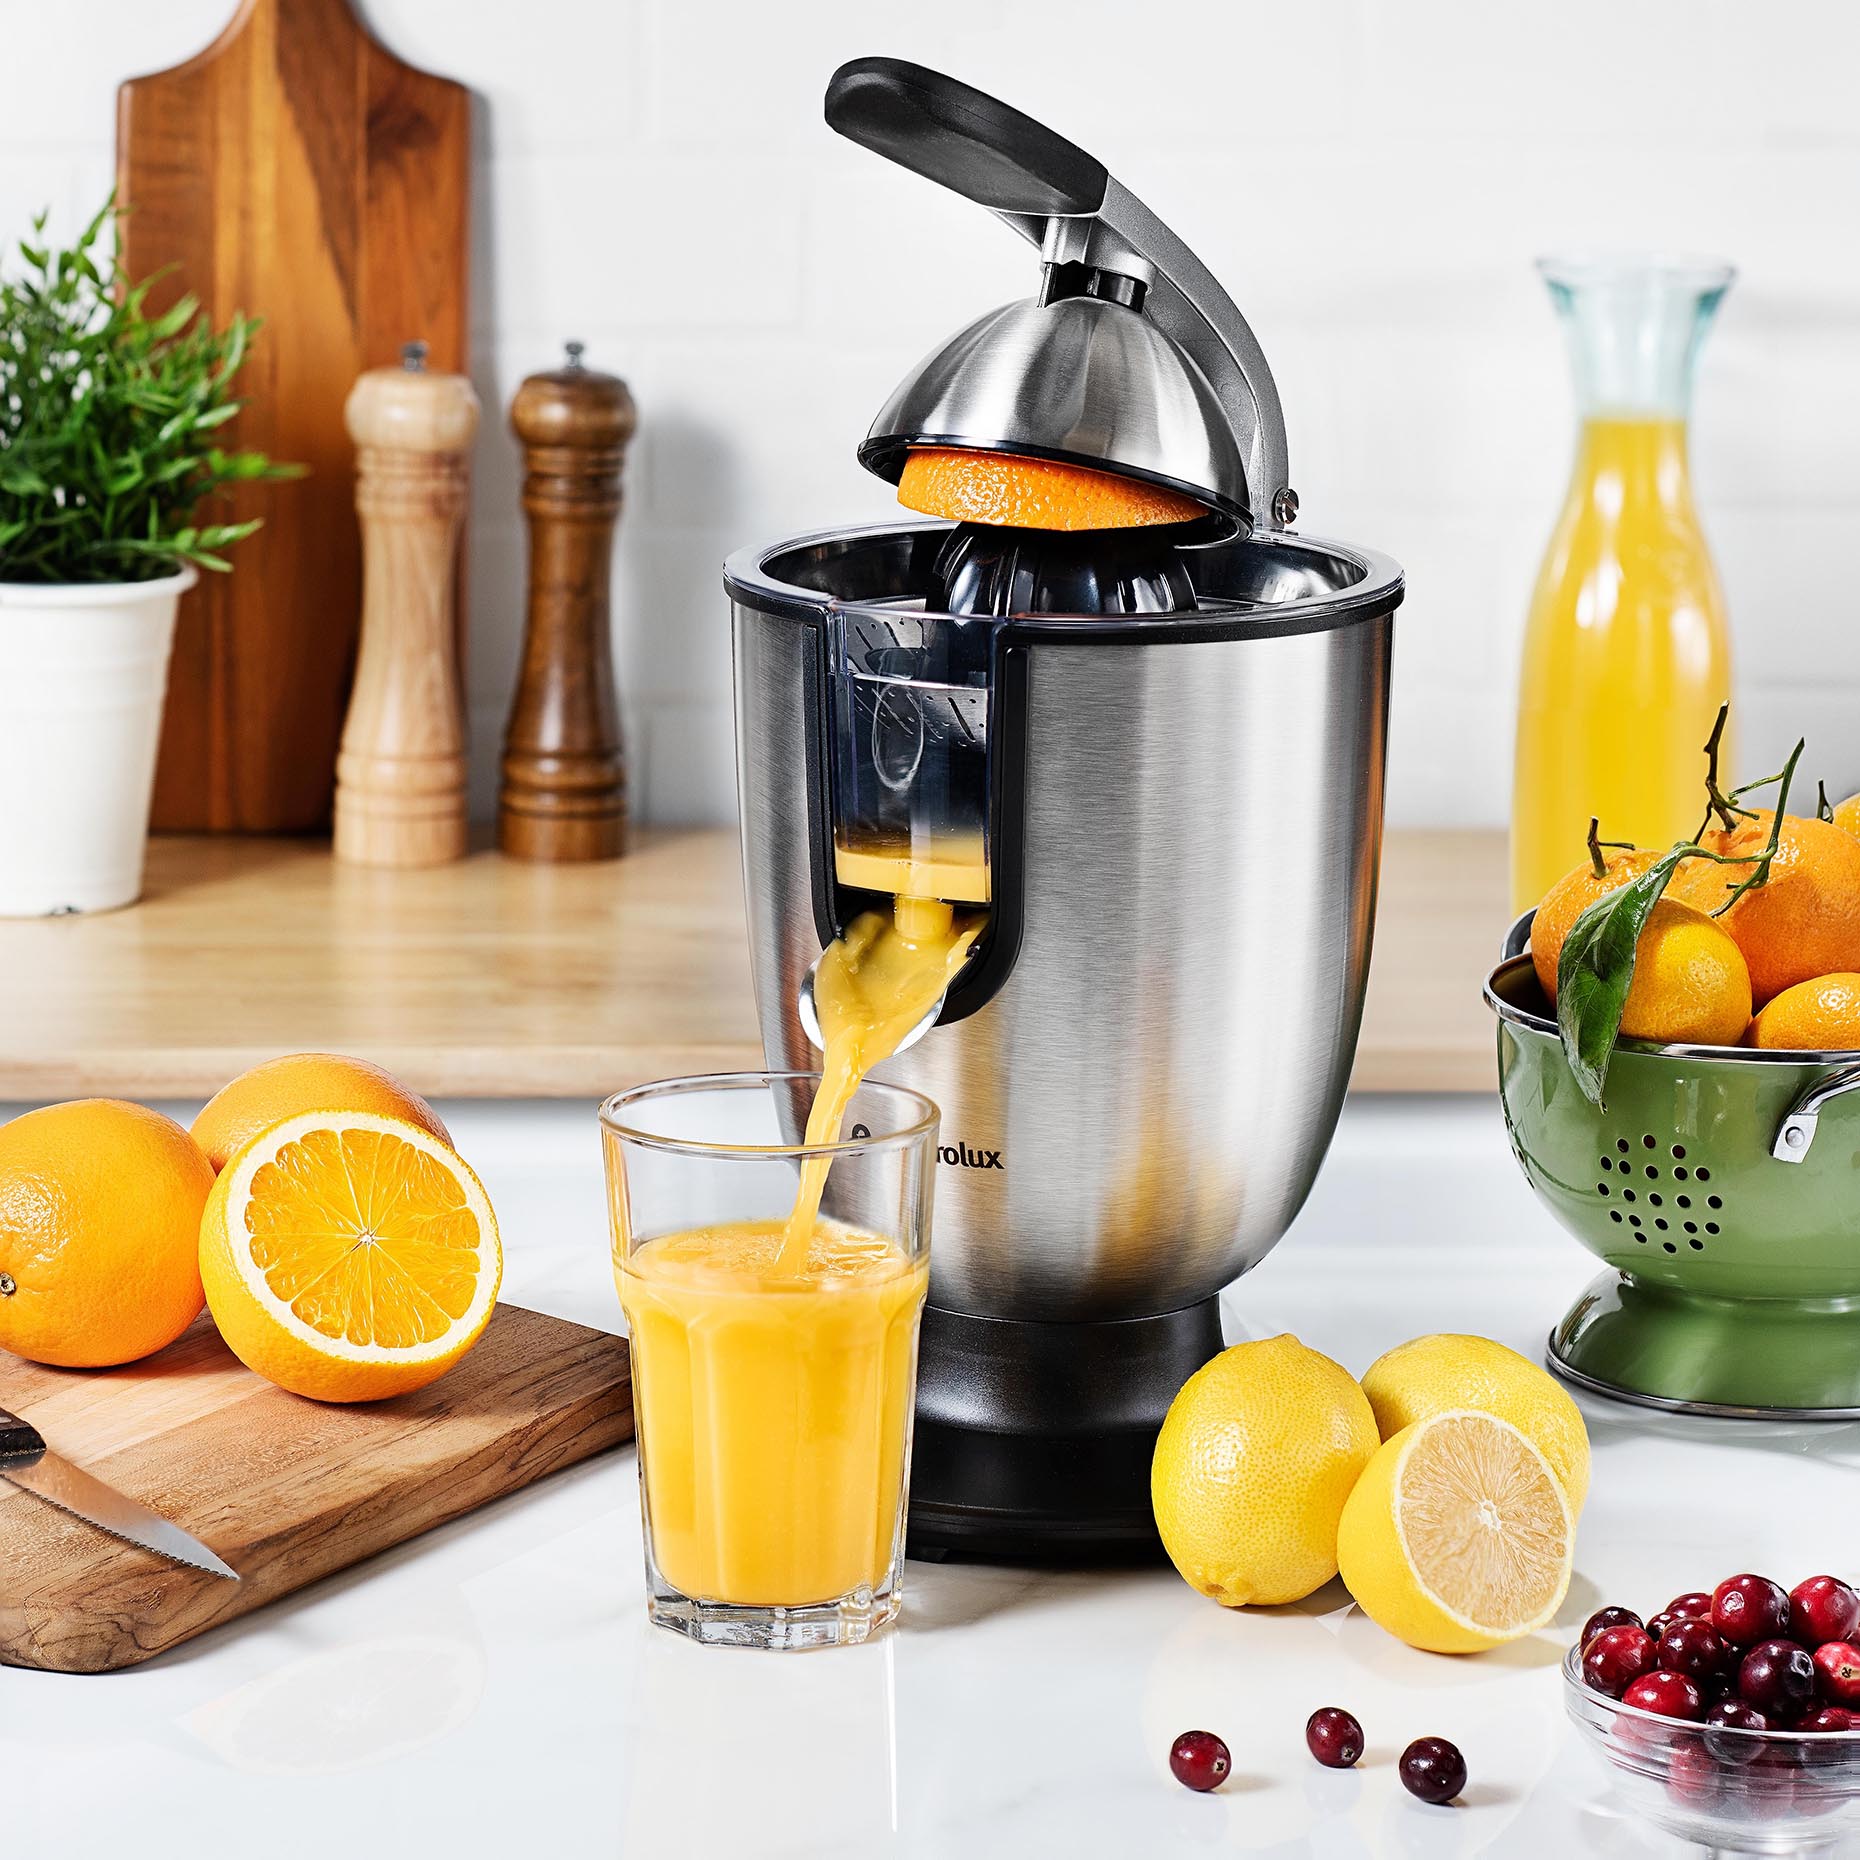 New-york-Food-Drink-Photography-Juicers